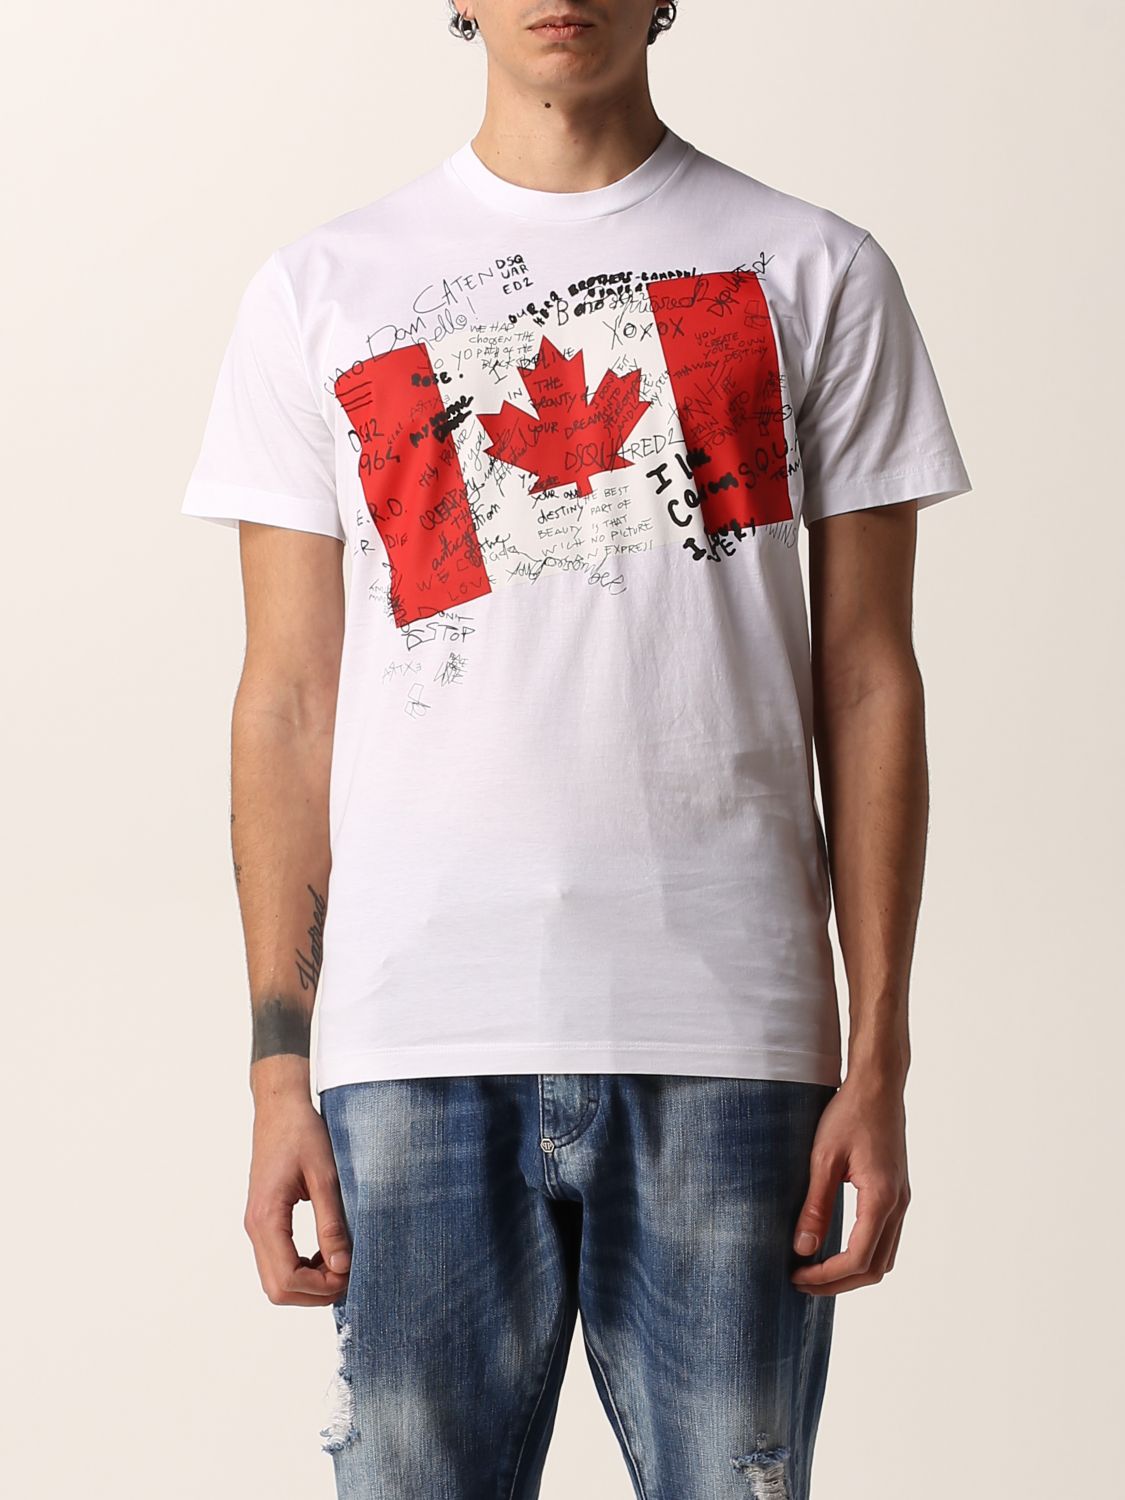 DSQUARED2: T-shirt with flag print - White | Dsquared2 t-shirt ...